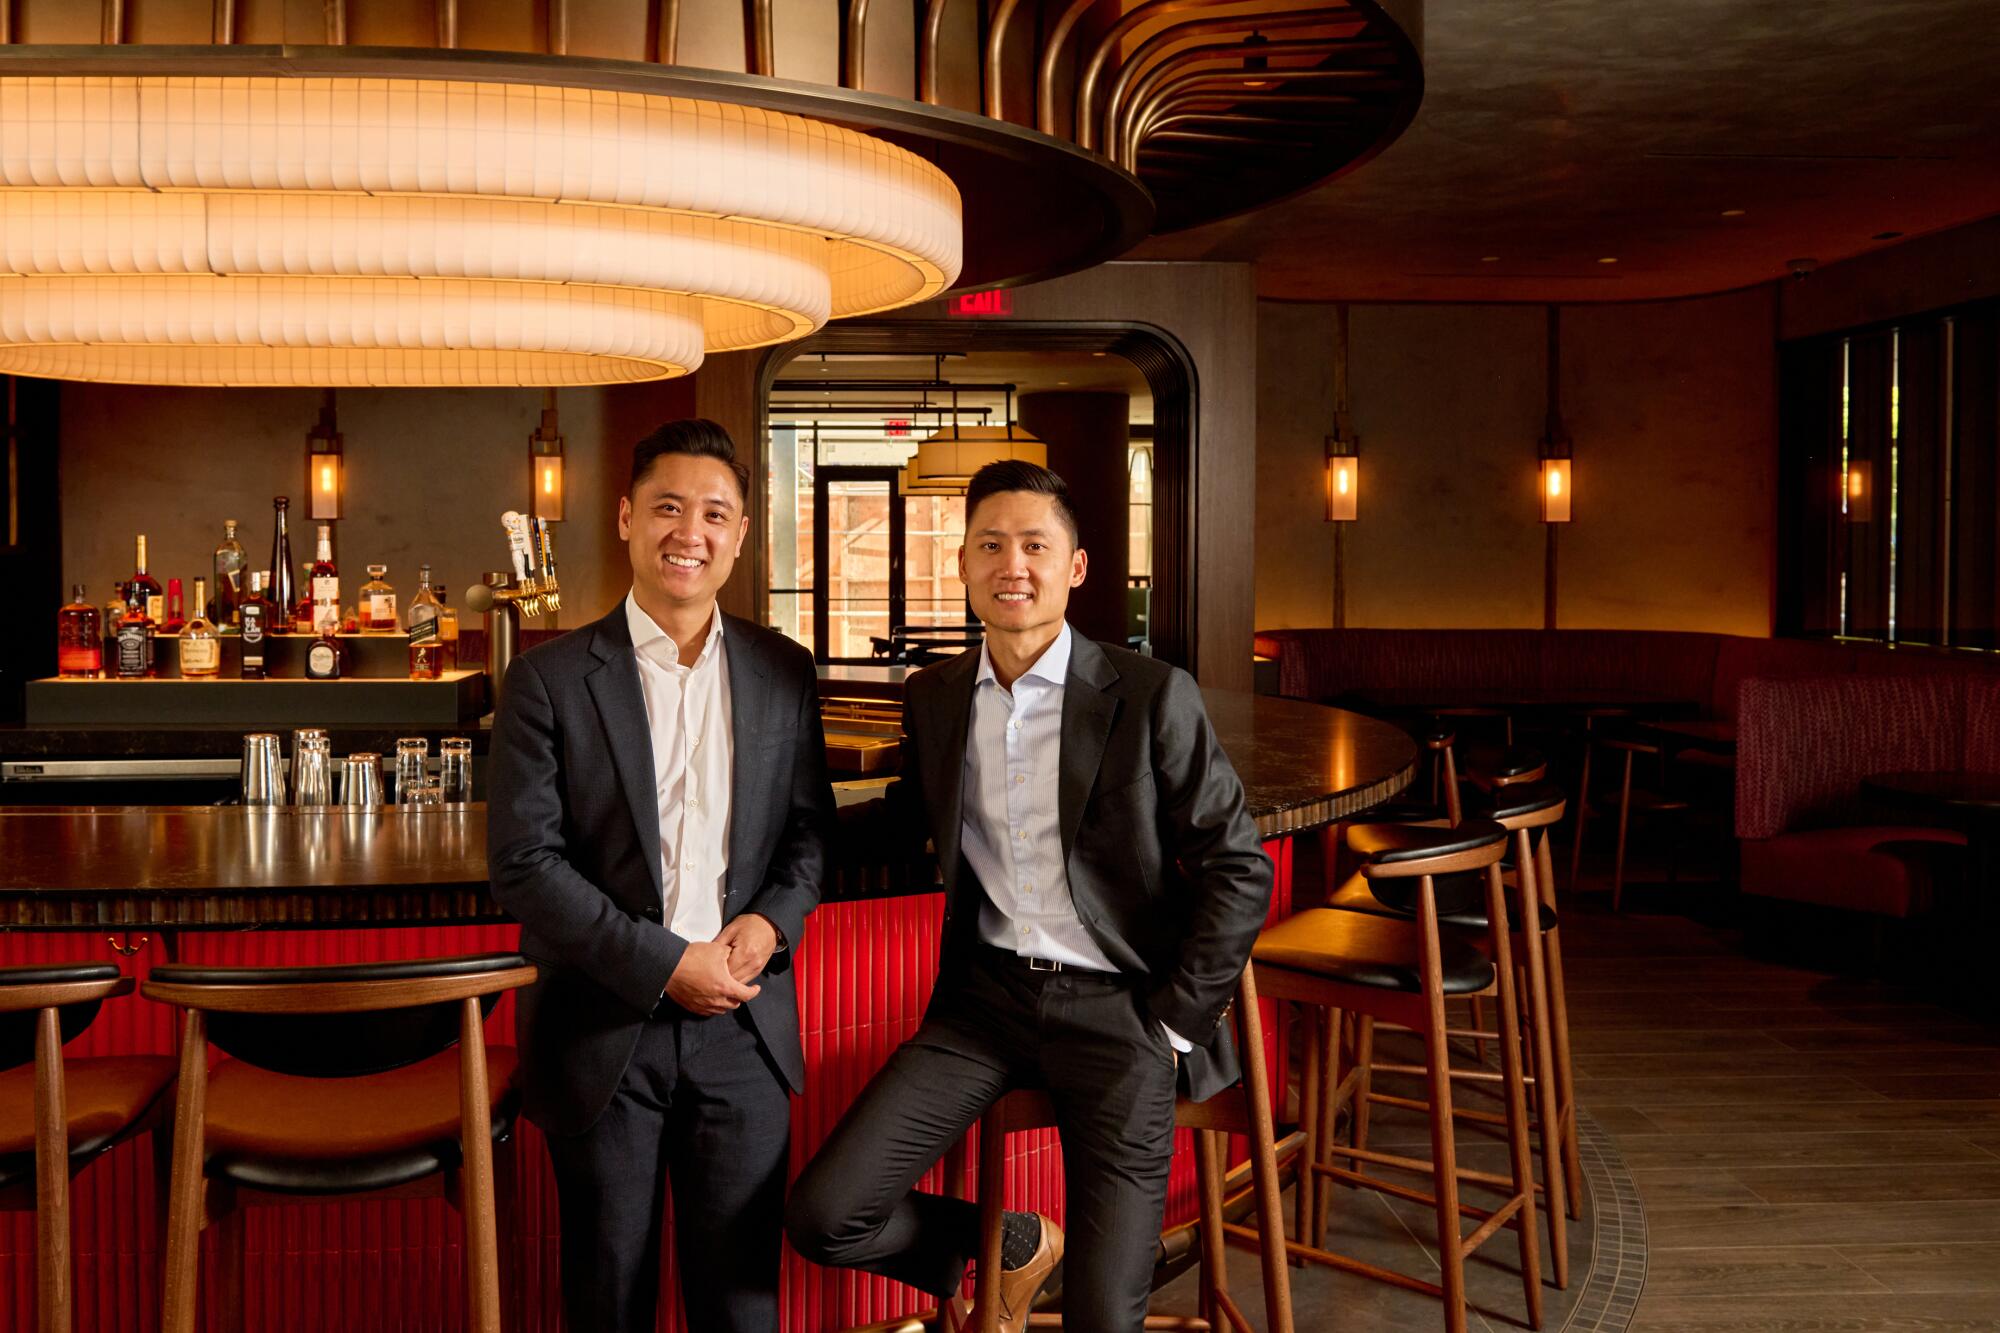 Brothers Aaron and Albert Yang in the bar at Din Tai Fung.